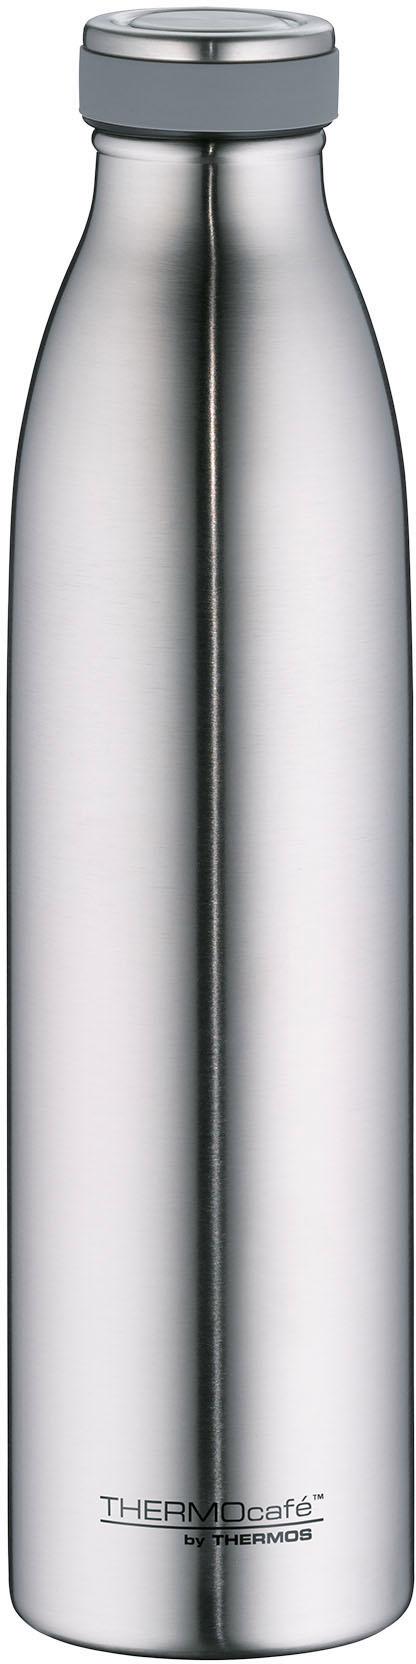 THERMOS Thermoflasche "TC Bottle", (1 tlg.)